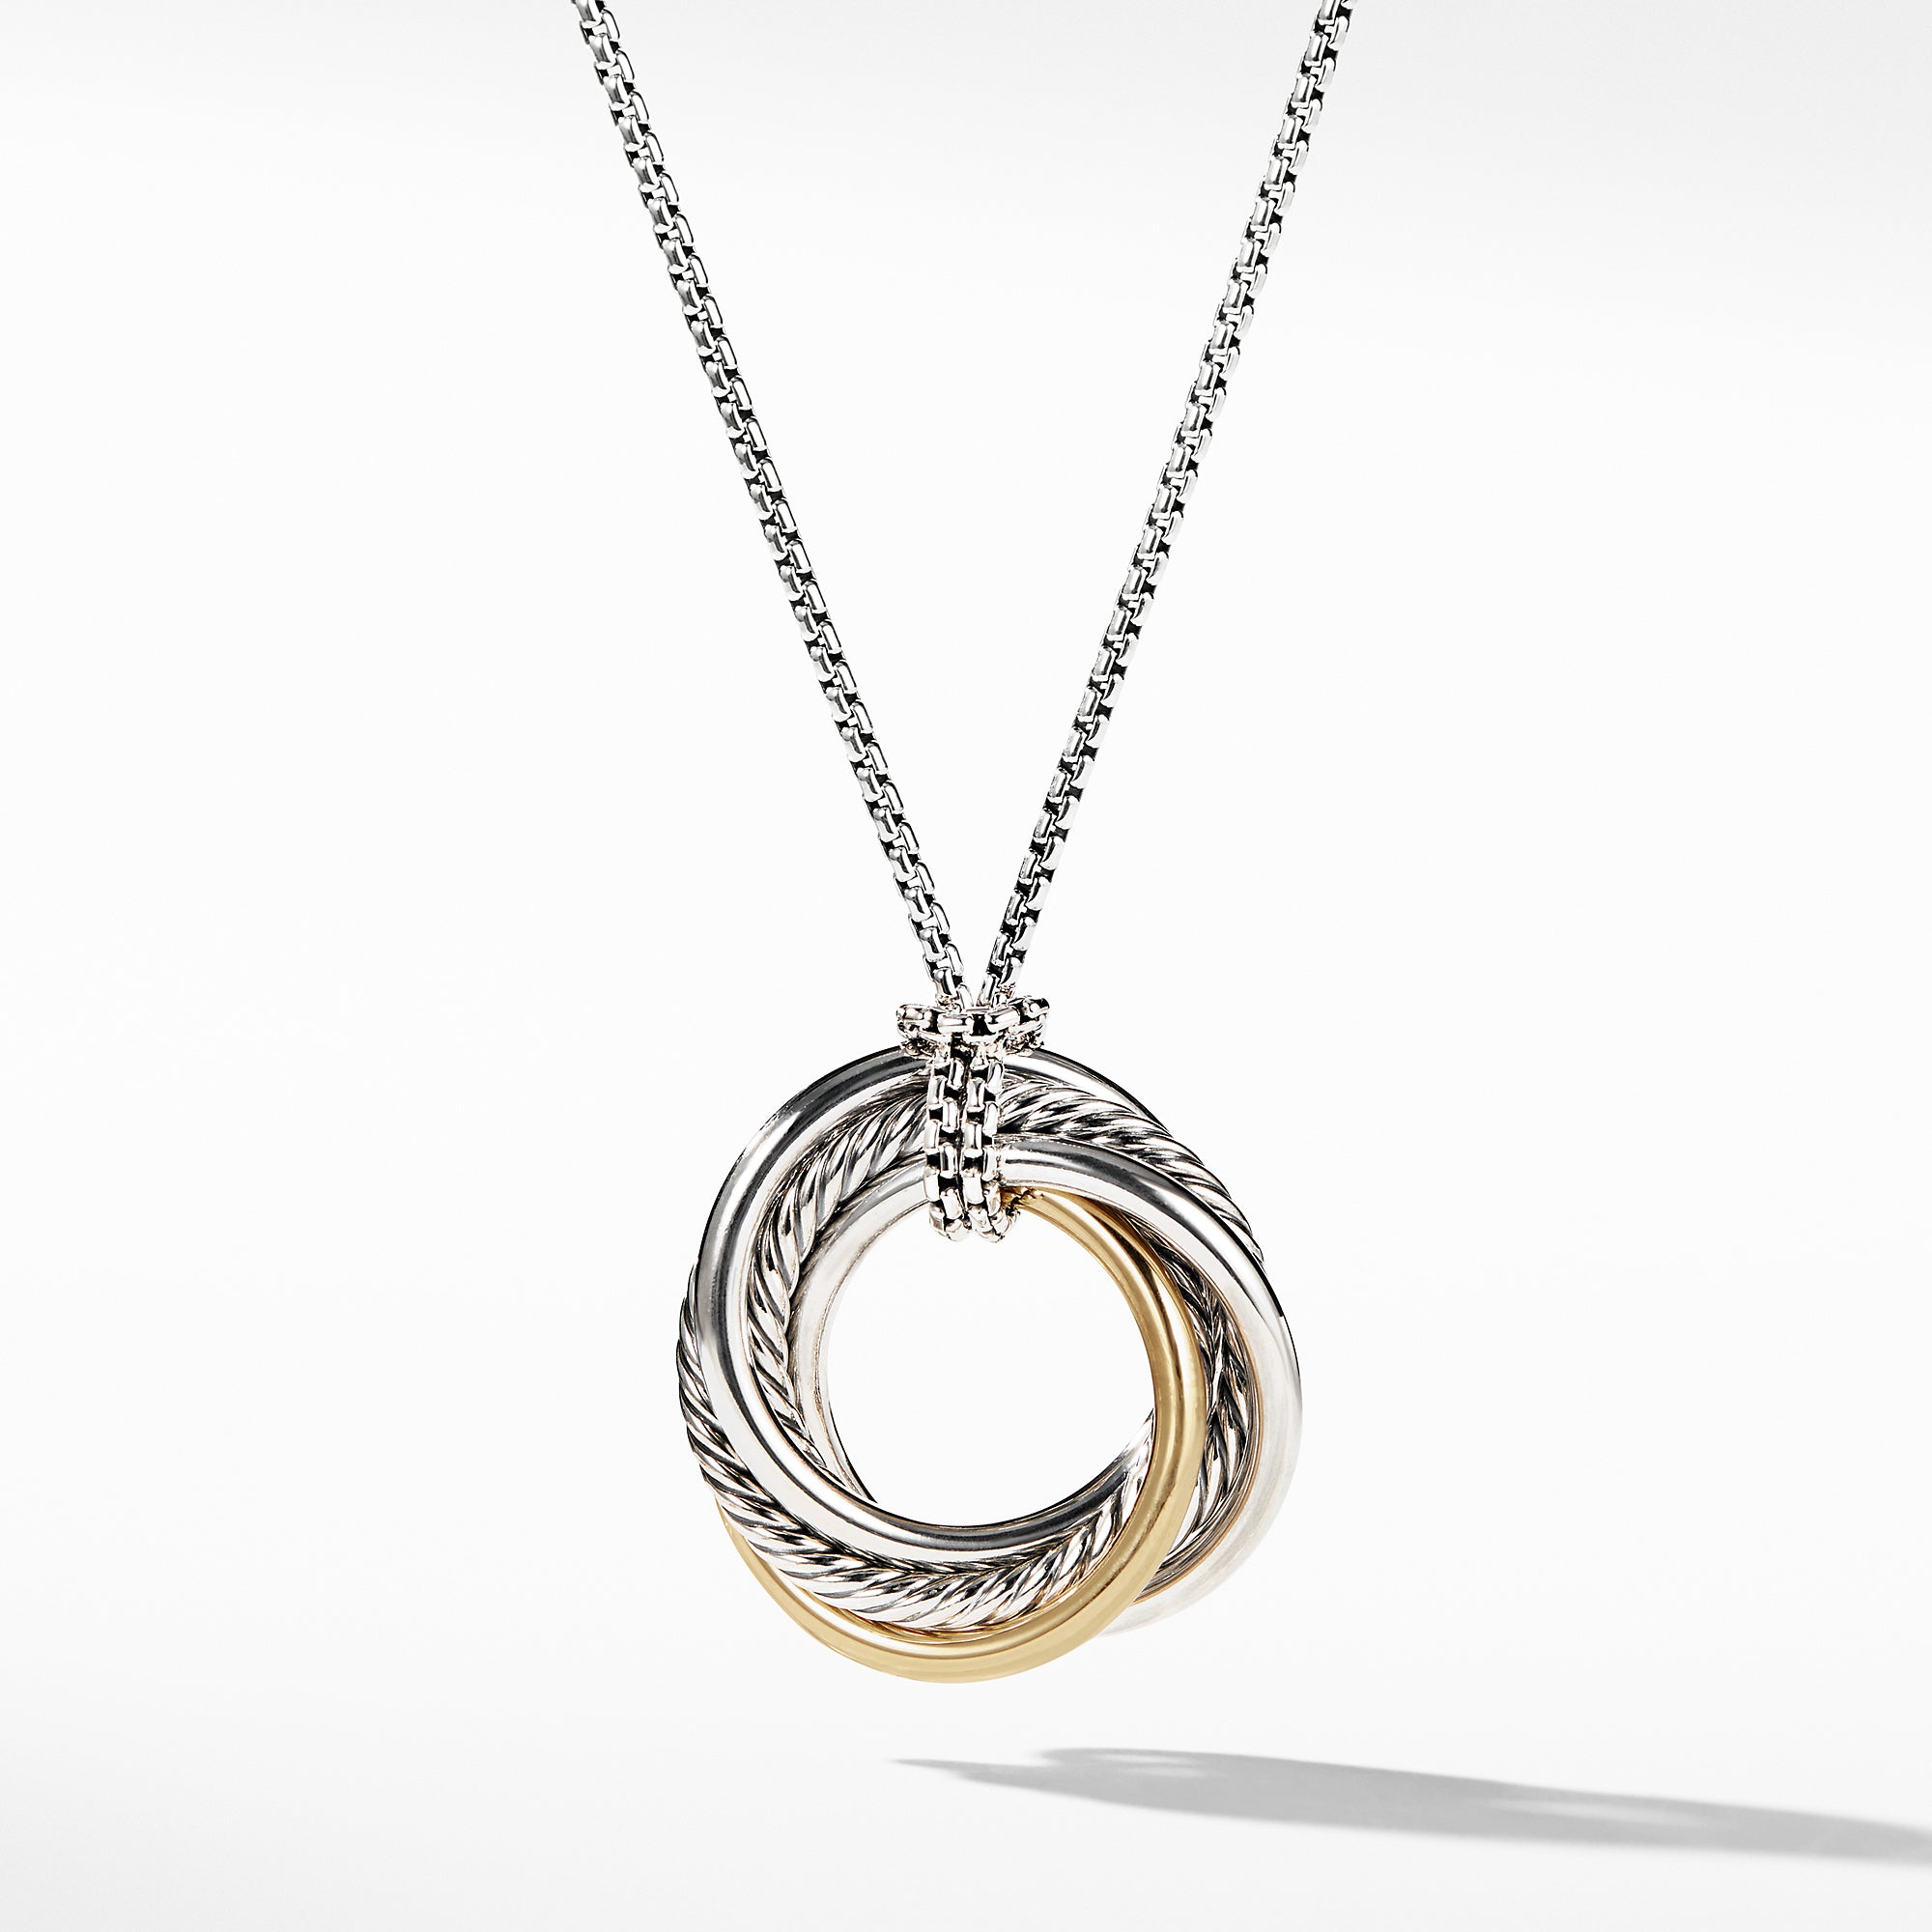 Pendant S4 Jewelers Necklace Crossover – Small David Fine Moyer with N11641 Gold- Yurman